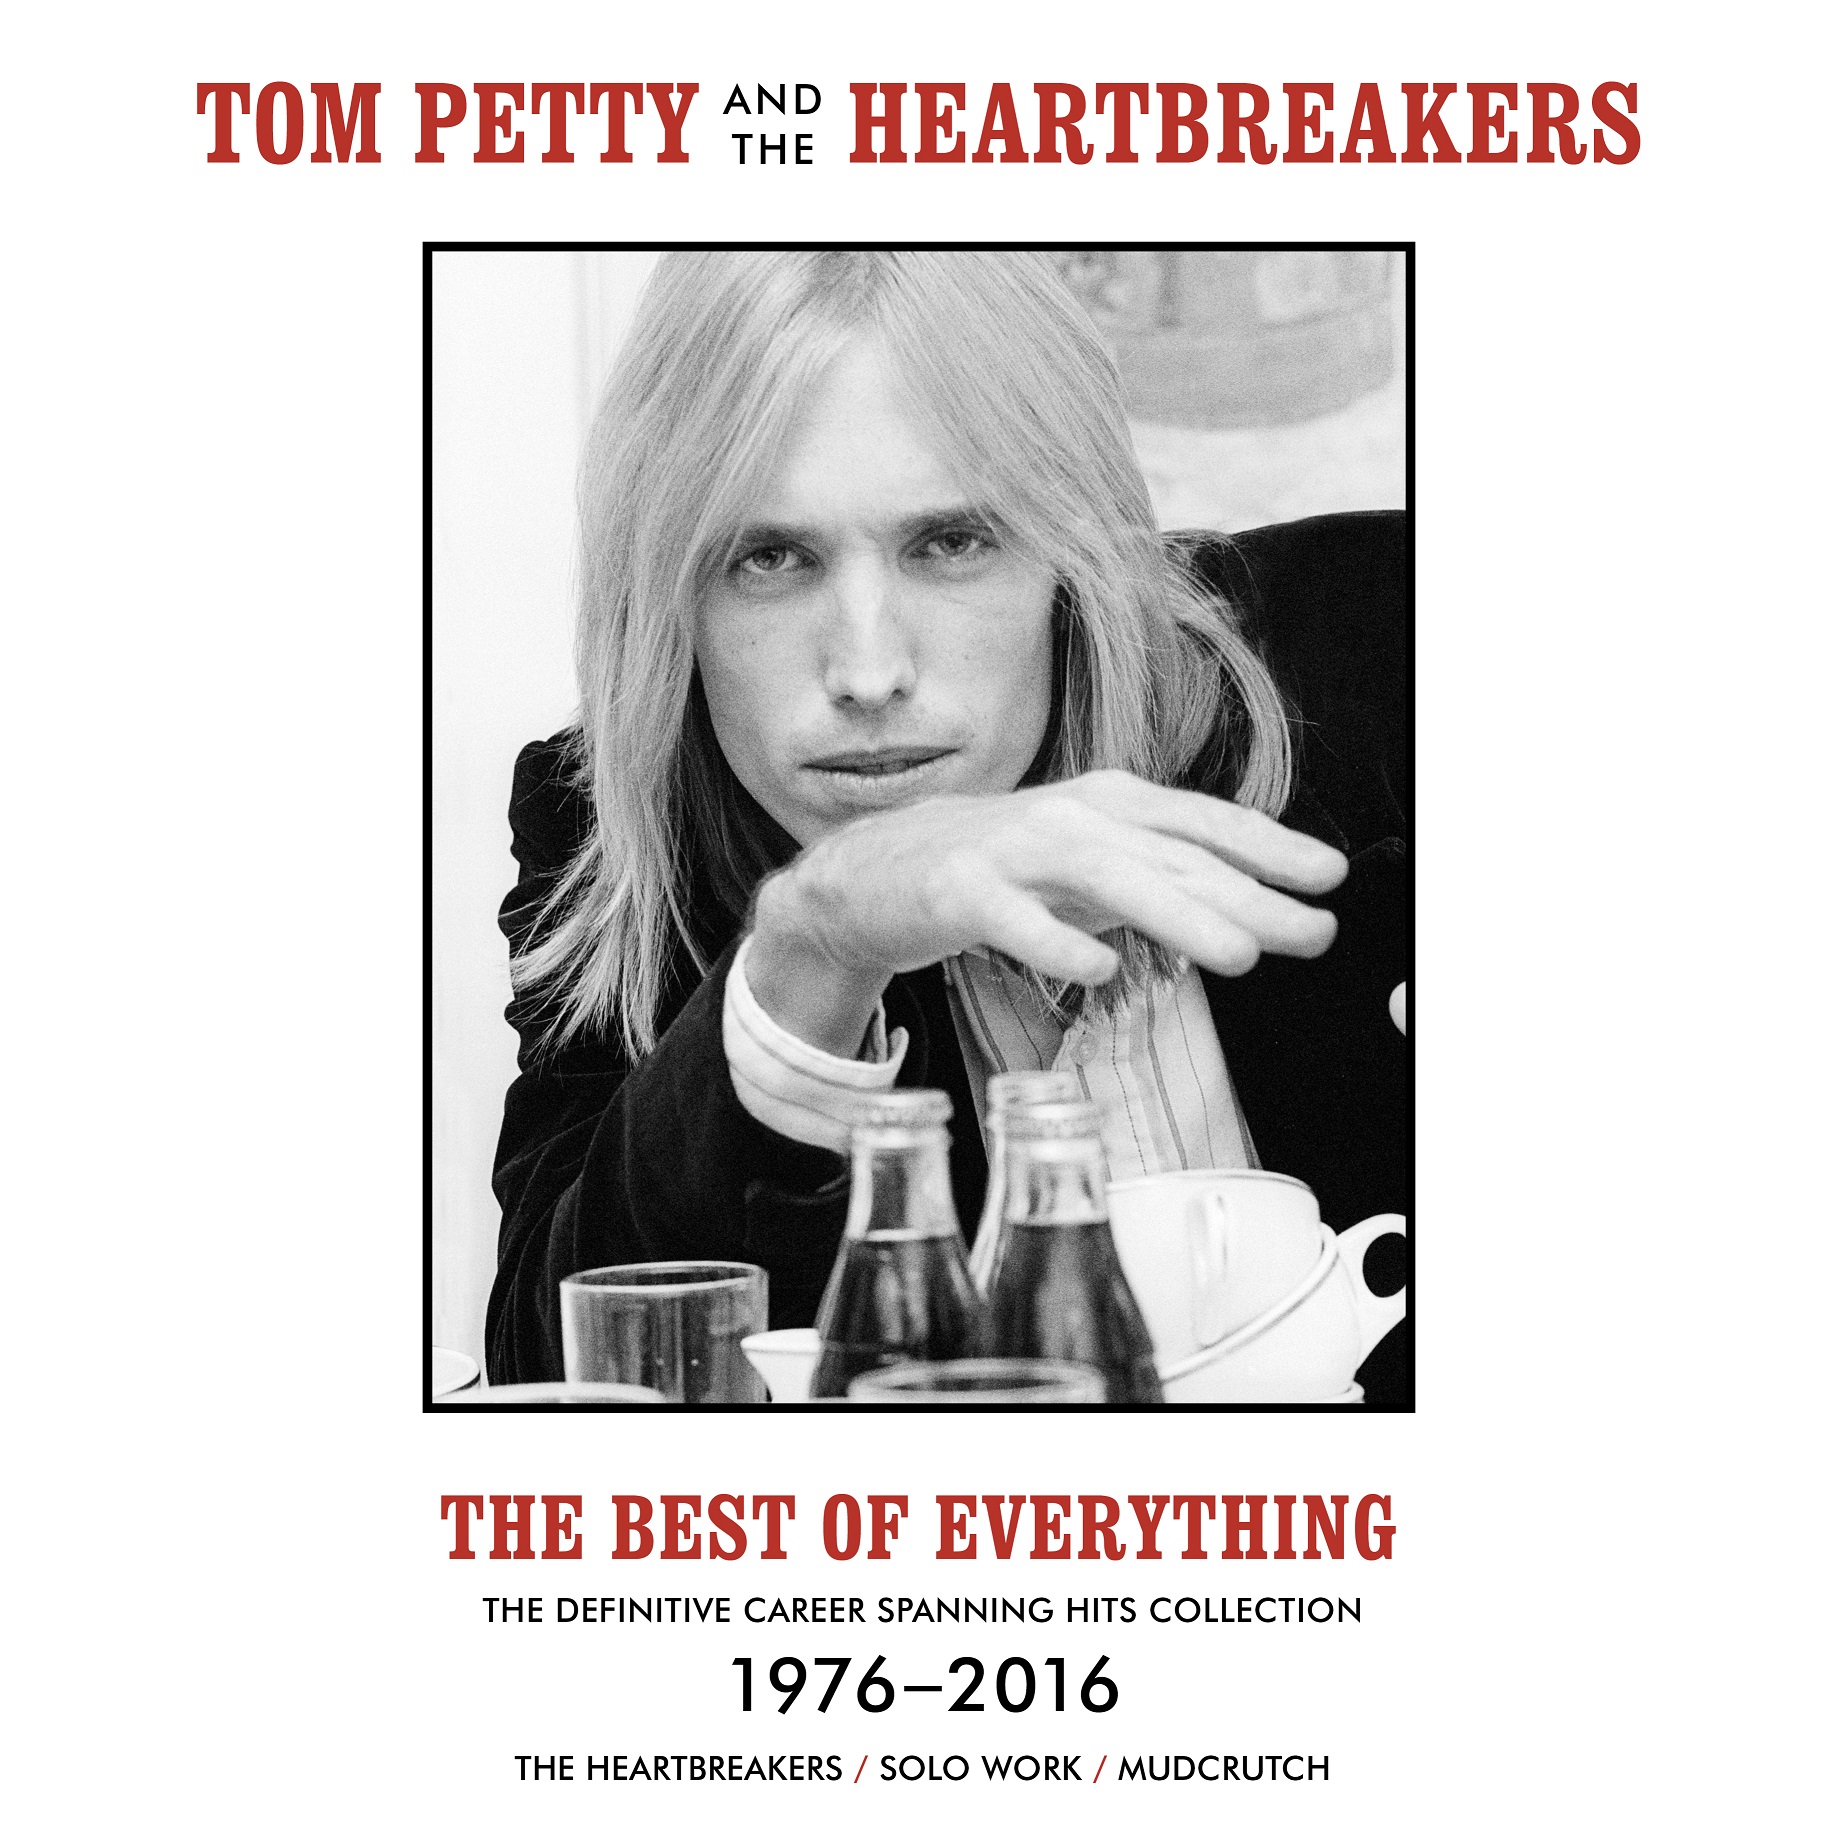 Tom Petty & The Heartbreaker's First CareerSpanning Hits Collection